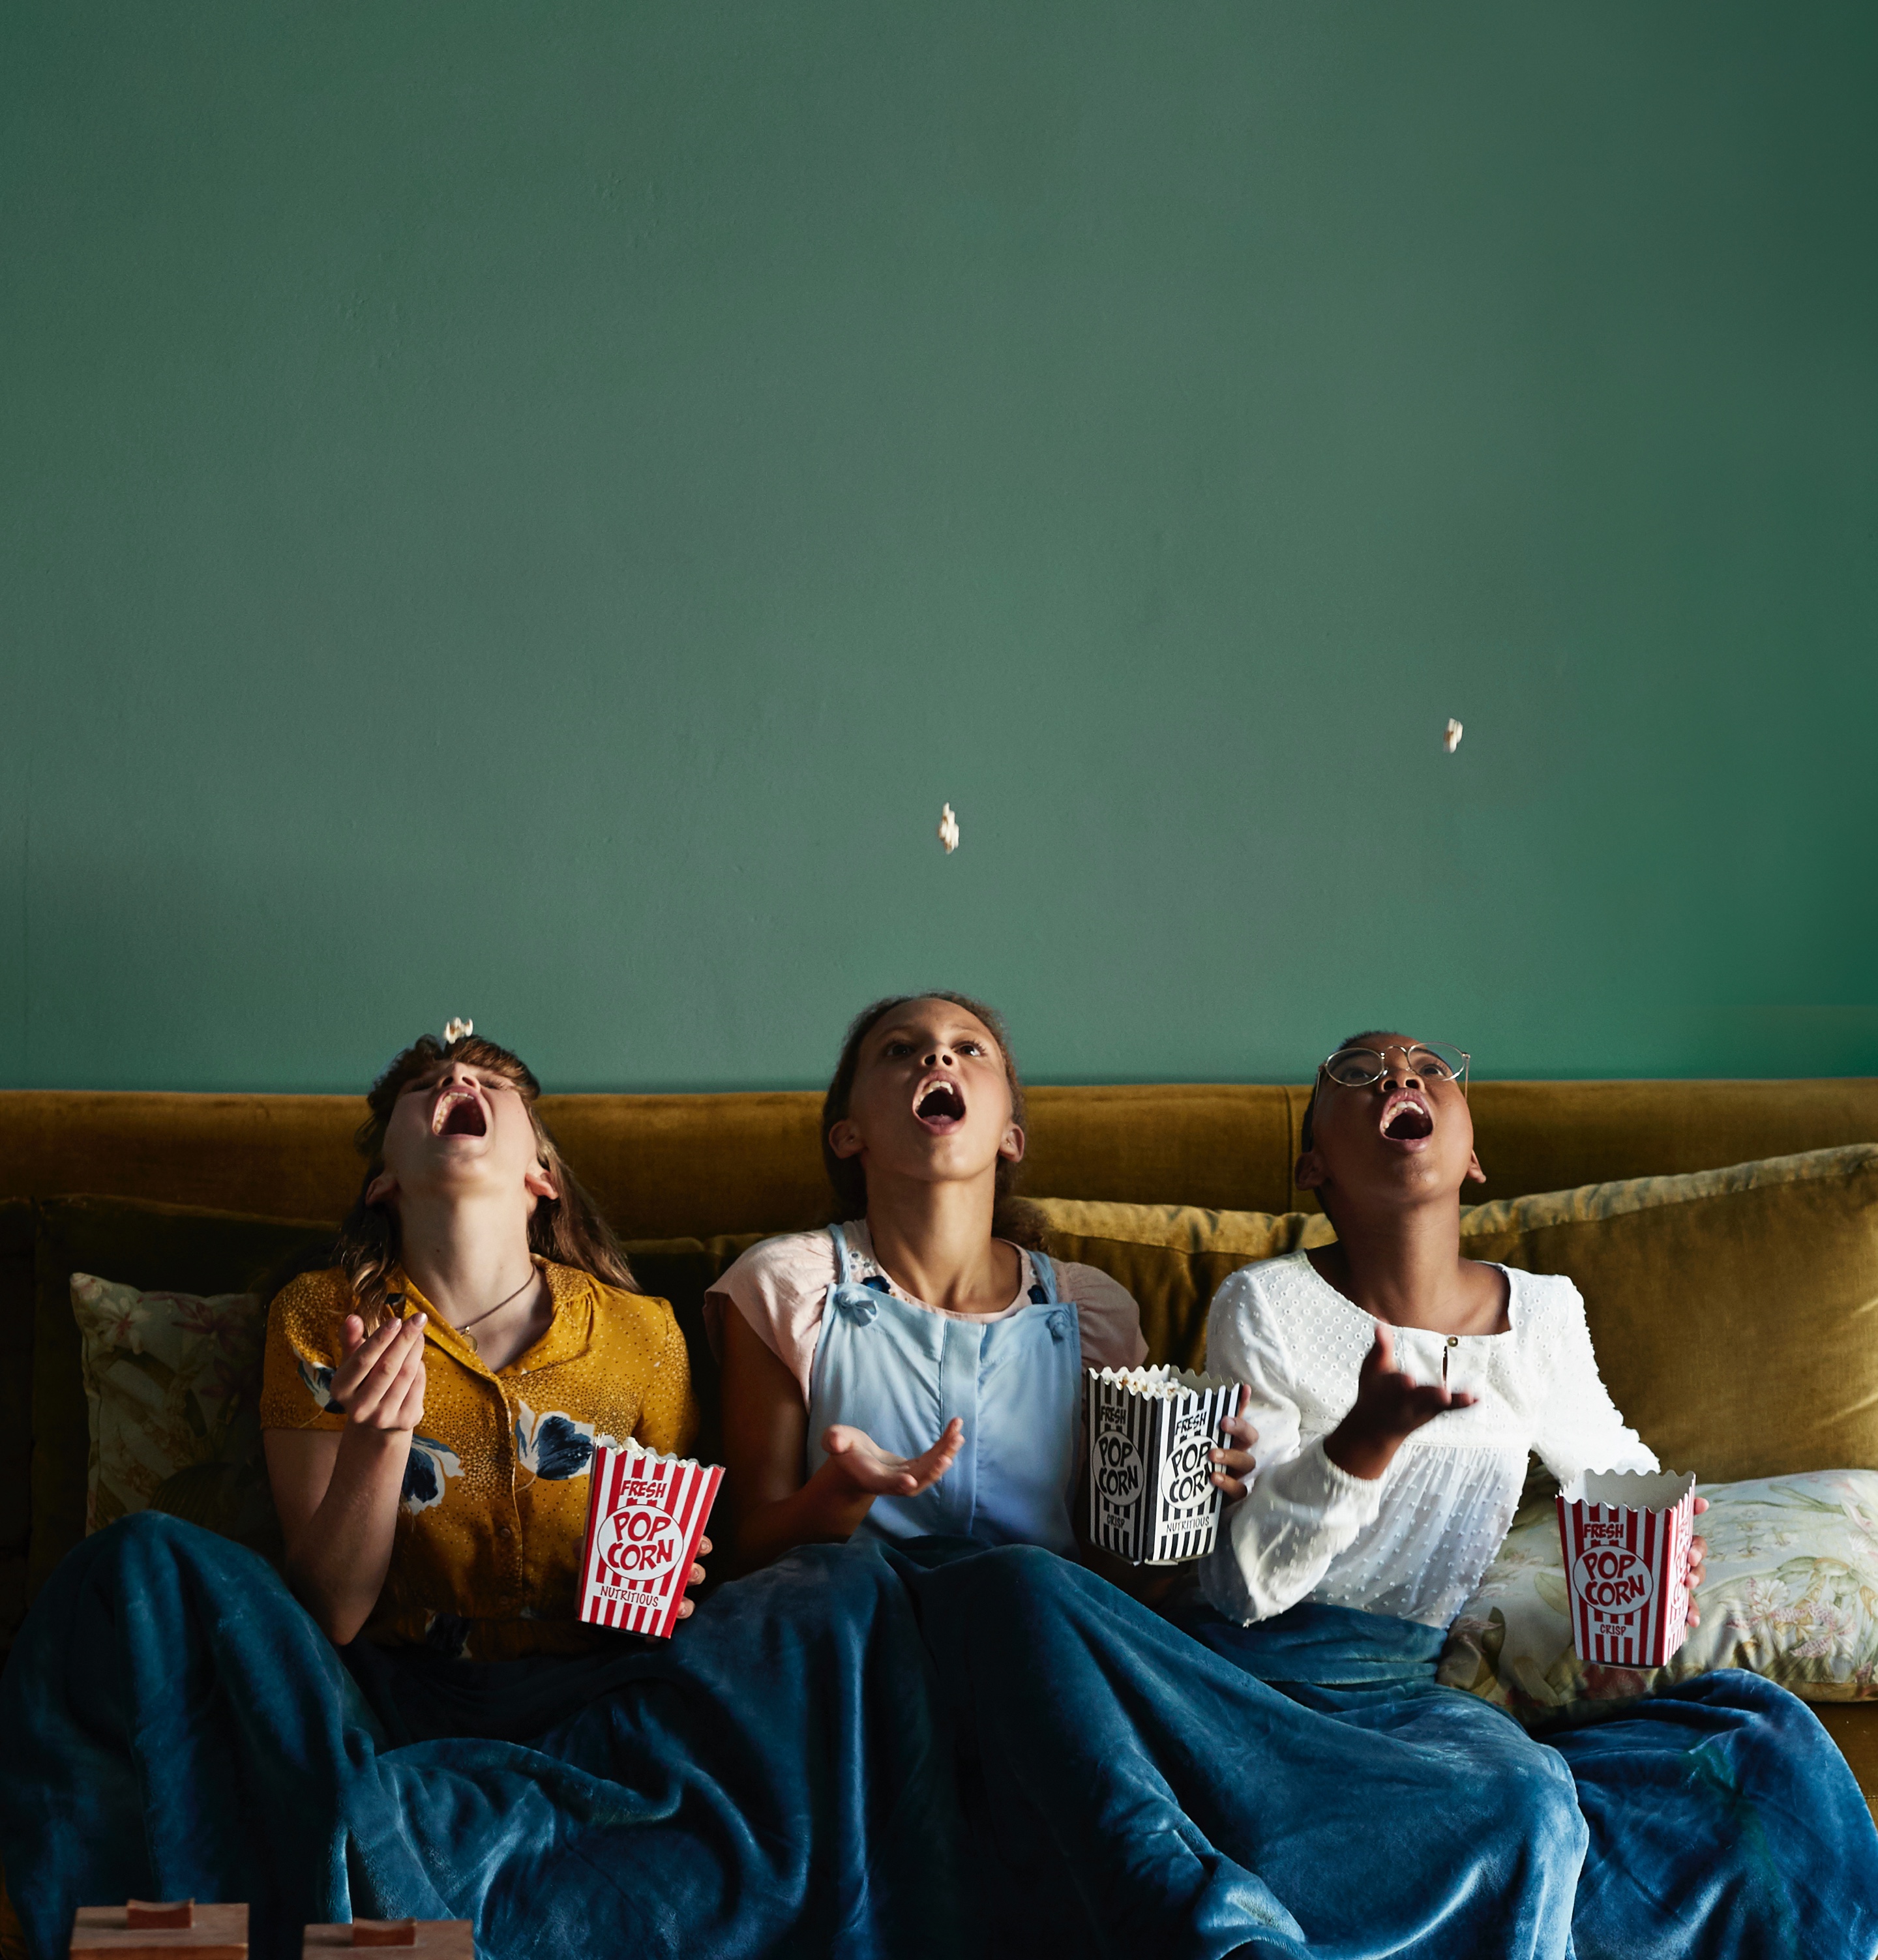 Three kids on a couch trying to catch popcorn in their mouths